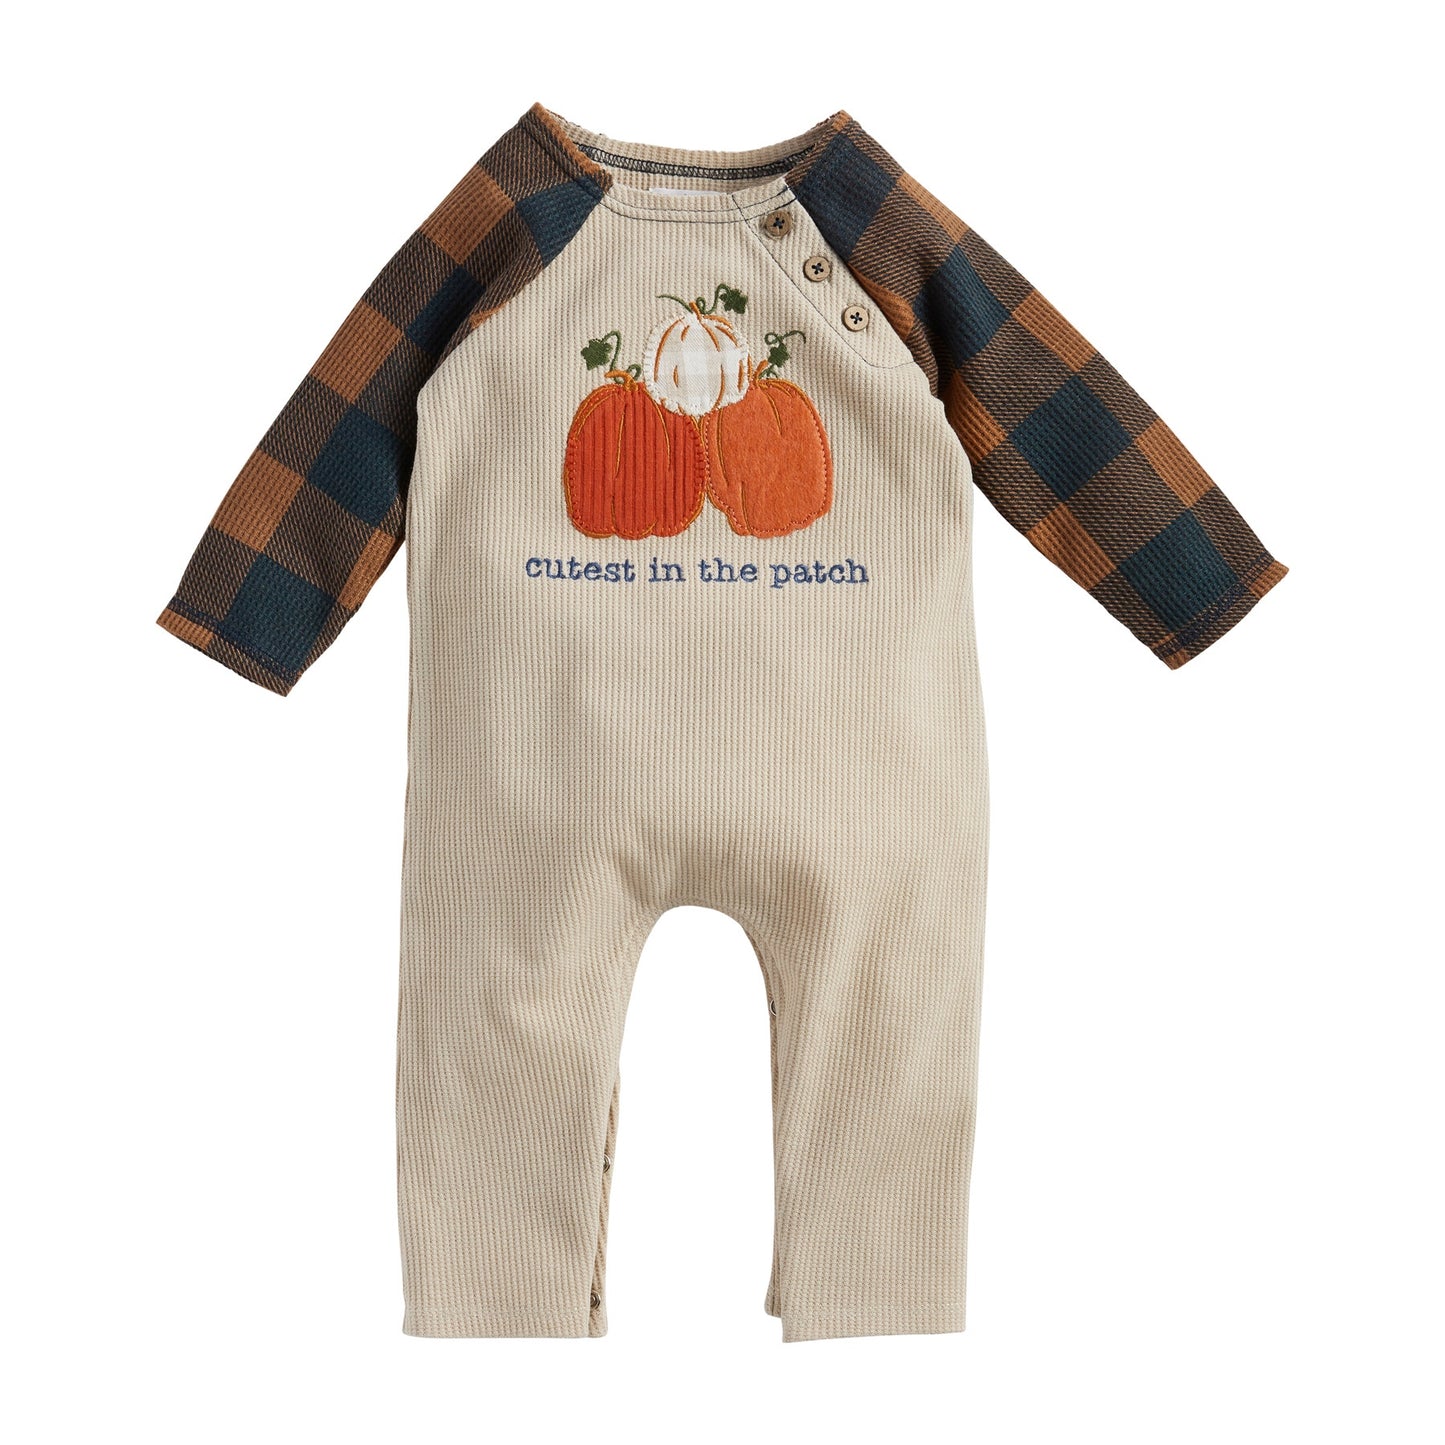 Cutest in the Patch Onesie